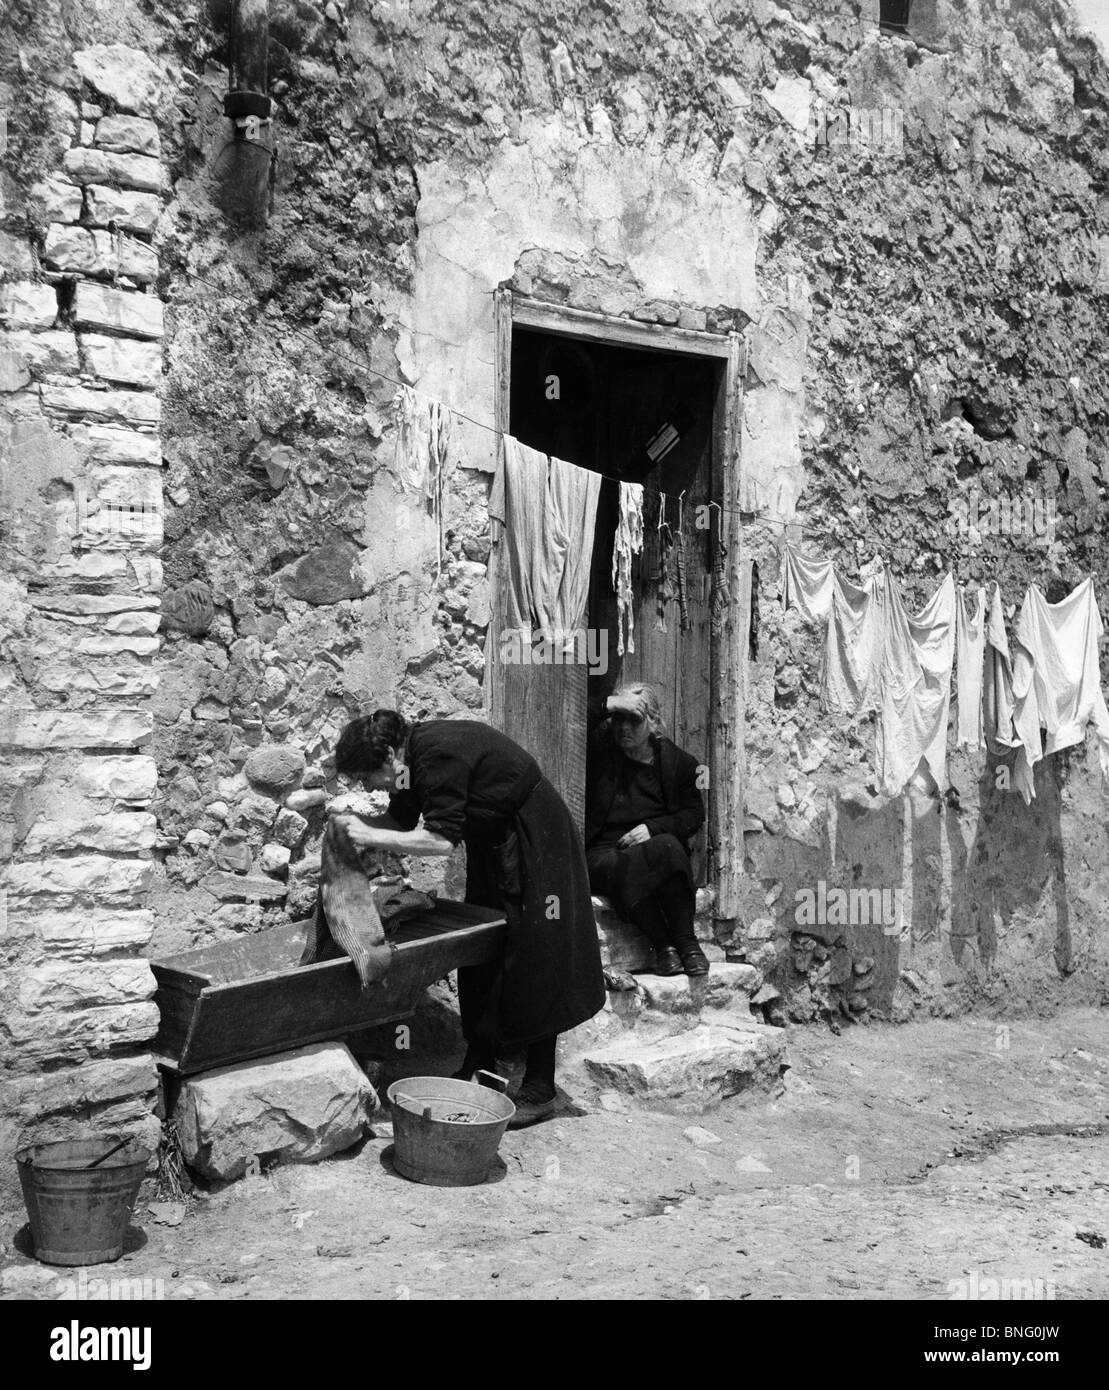 Italy, Sicily, woman doing laundry, another woman sitting near entrance Stock Photo